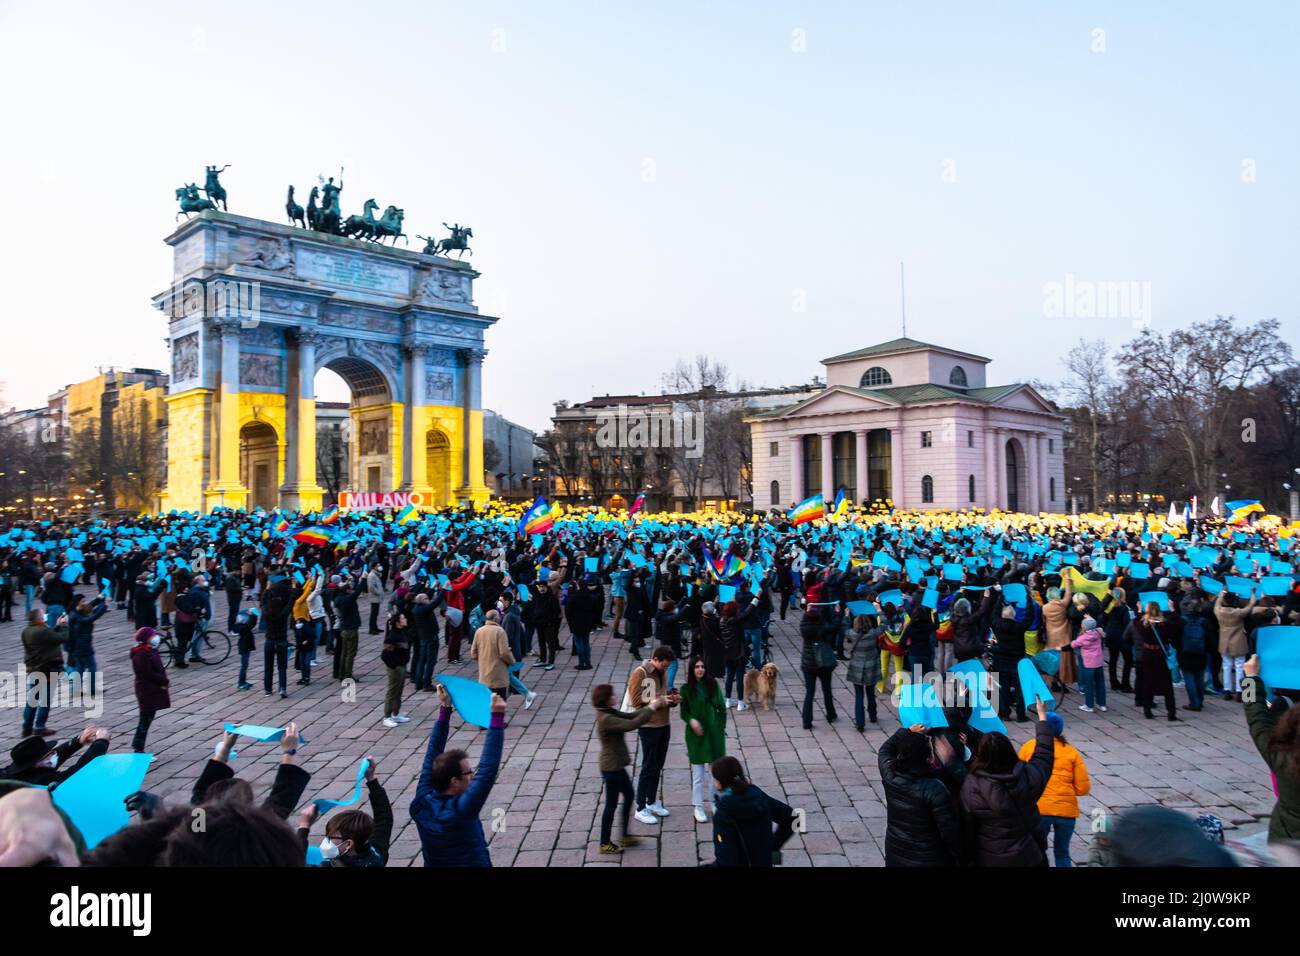 Milan, Italy - 03 19 2022: demonstration against Ukraine war at Peace Arch, Arco della Pace, illuminated with Ukraine flag colors, yellow and blue Stock Photo